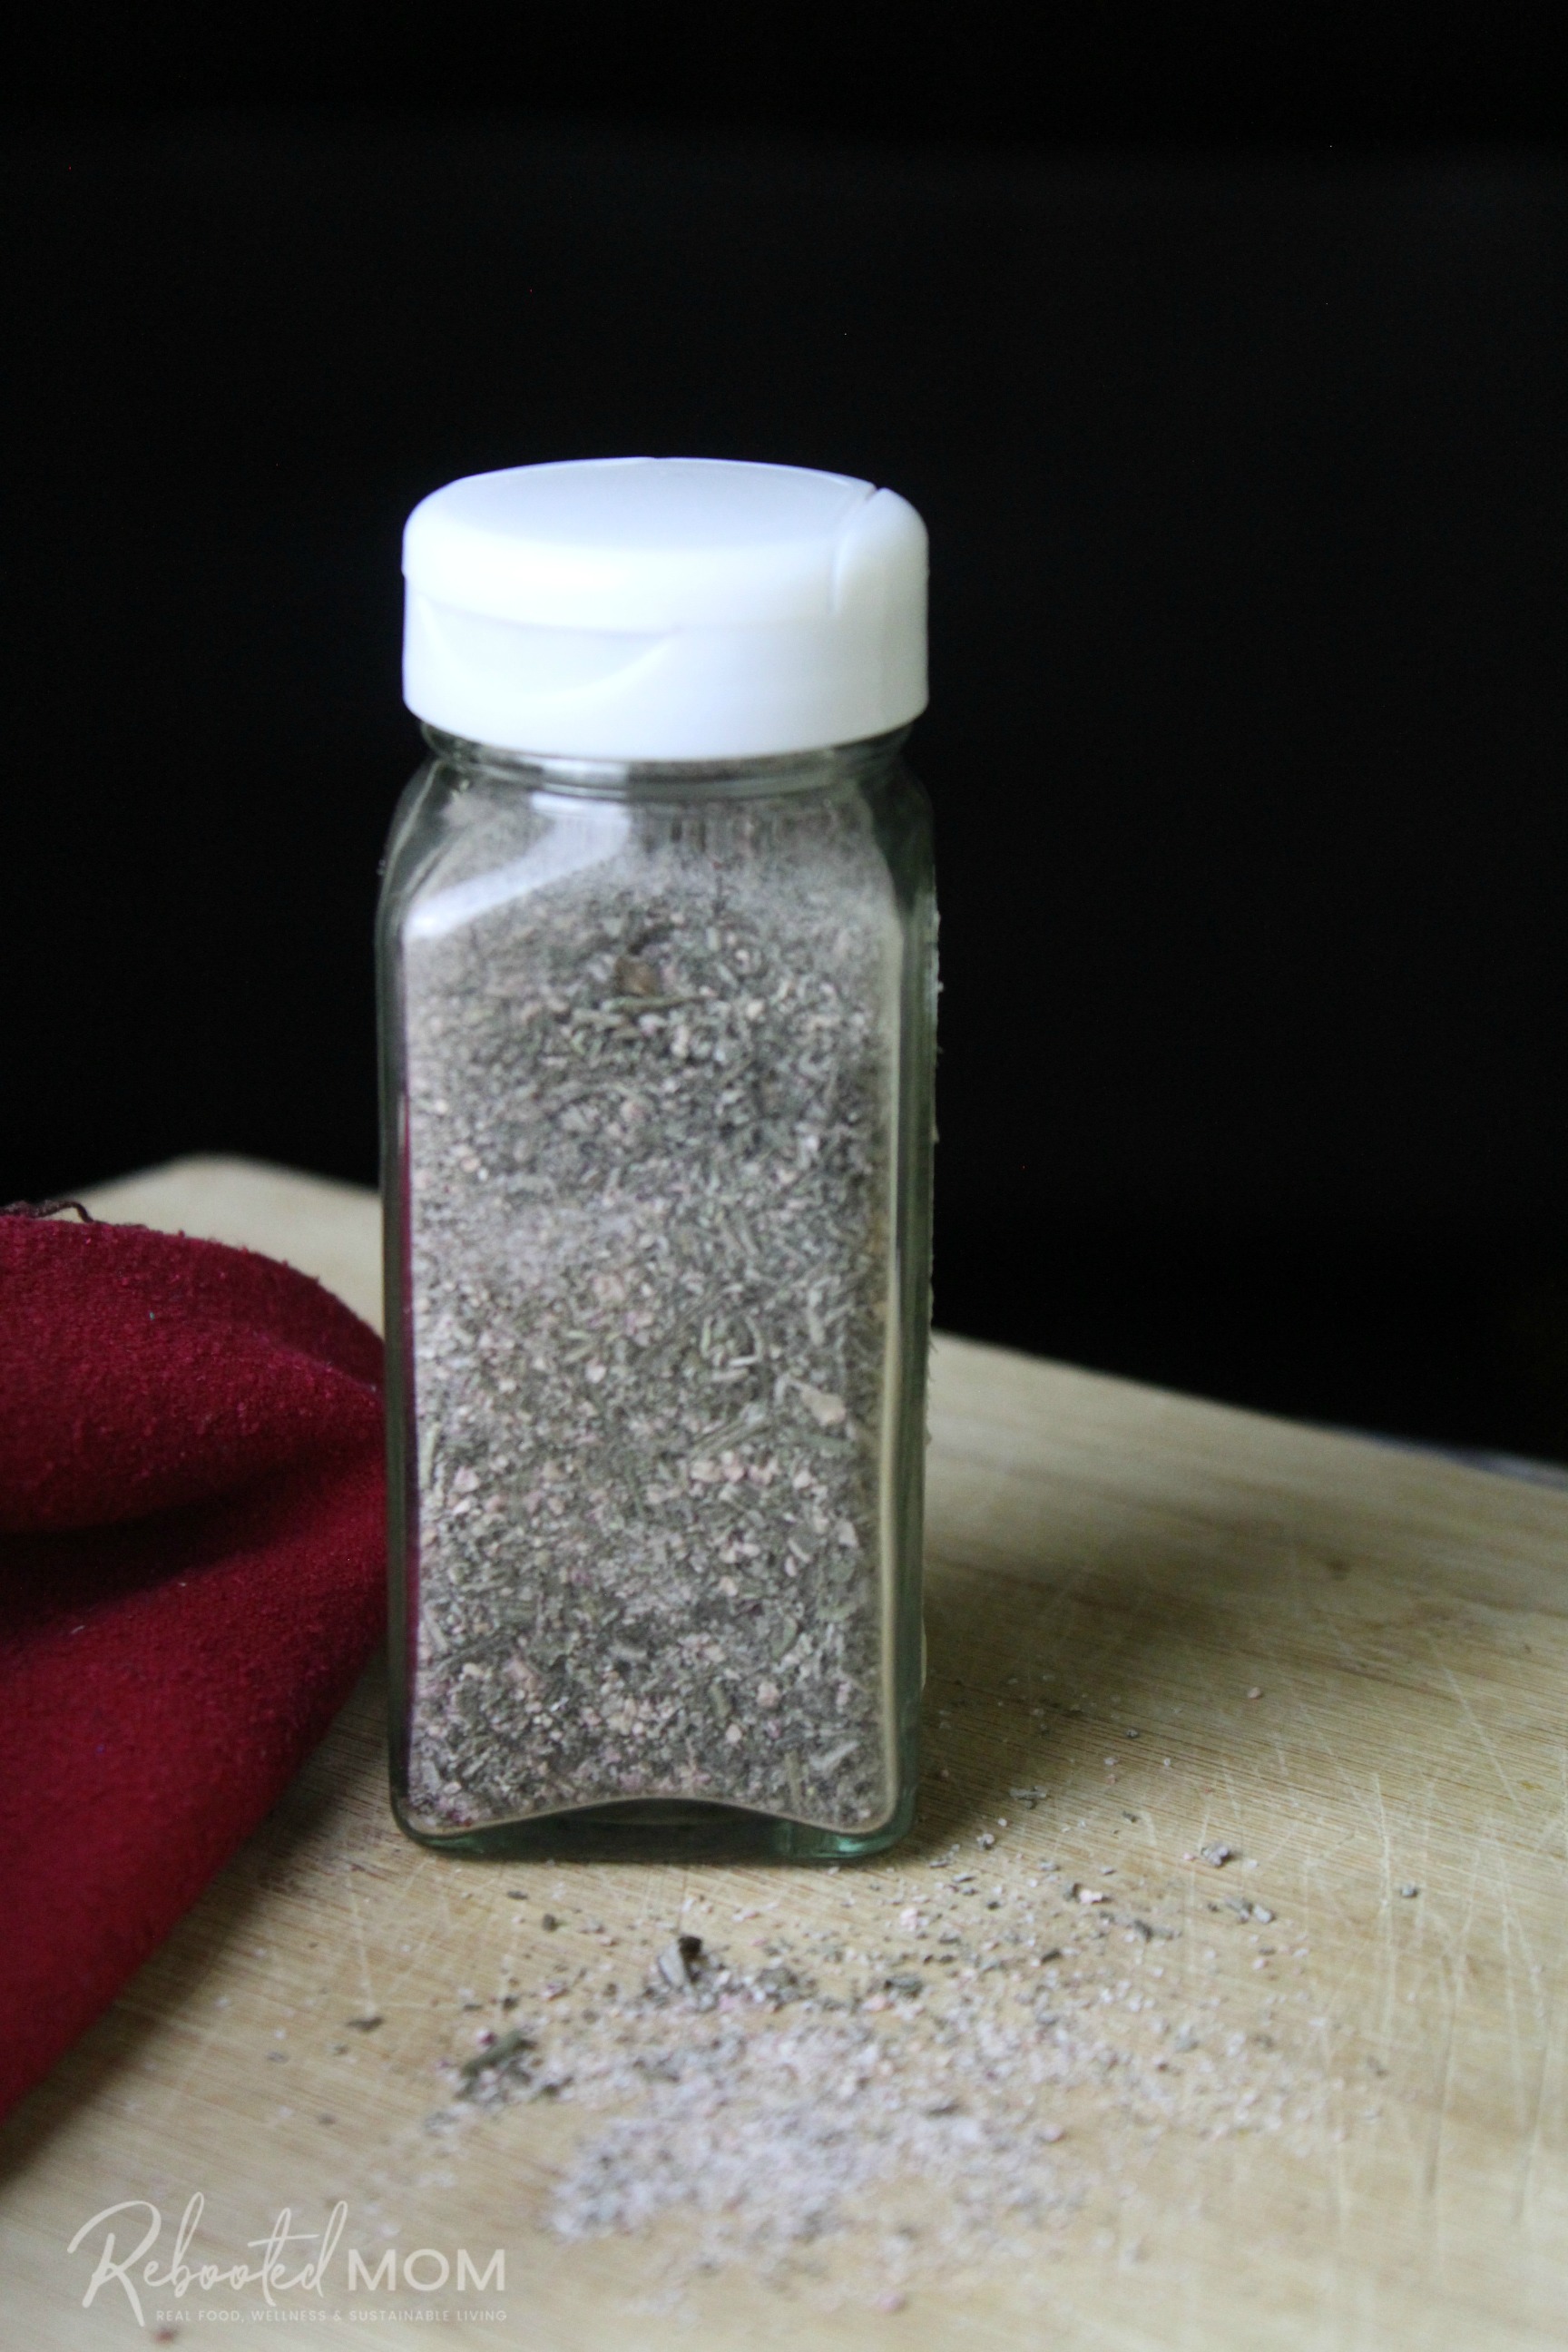 Radish and Rosemary Salt \ Rosemary Radish Veggie Salt is a simple and creative way to use up your garden bounty and a delicious way to flavor your favorite summer foods!